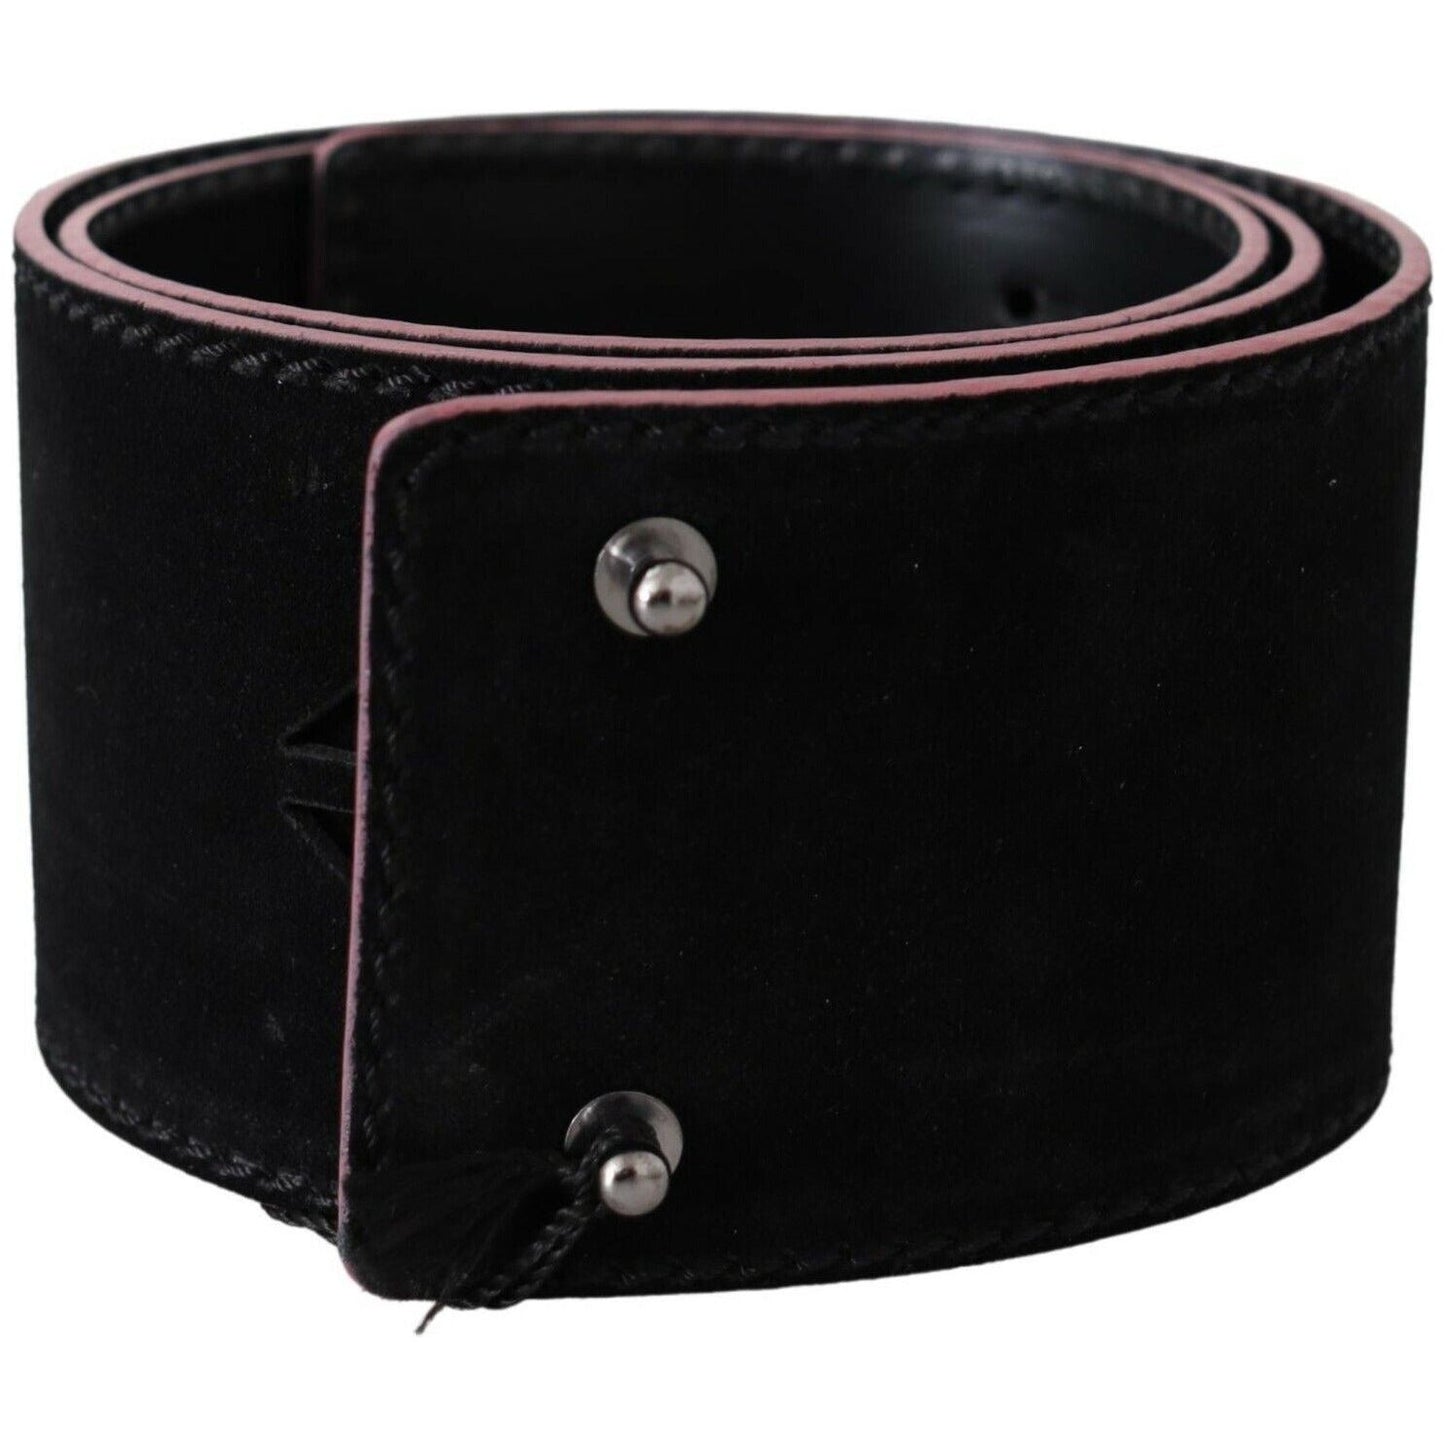 Costume National Elegant Wide Leather Fashion Belt with Metal Accents black-leather-wide-waist-studded-women-belt